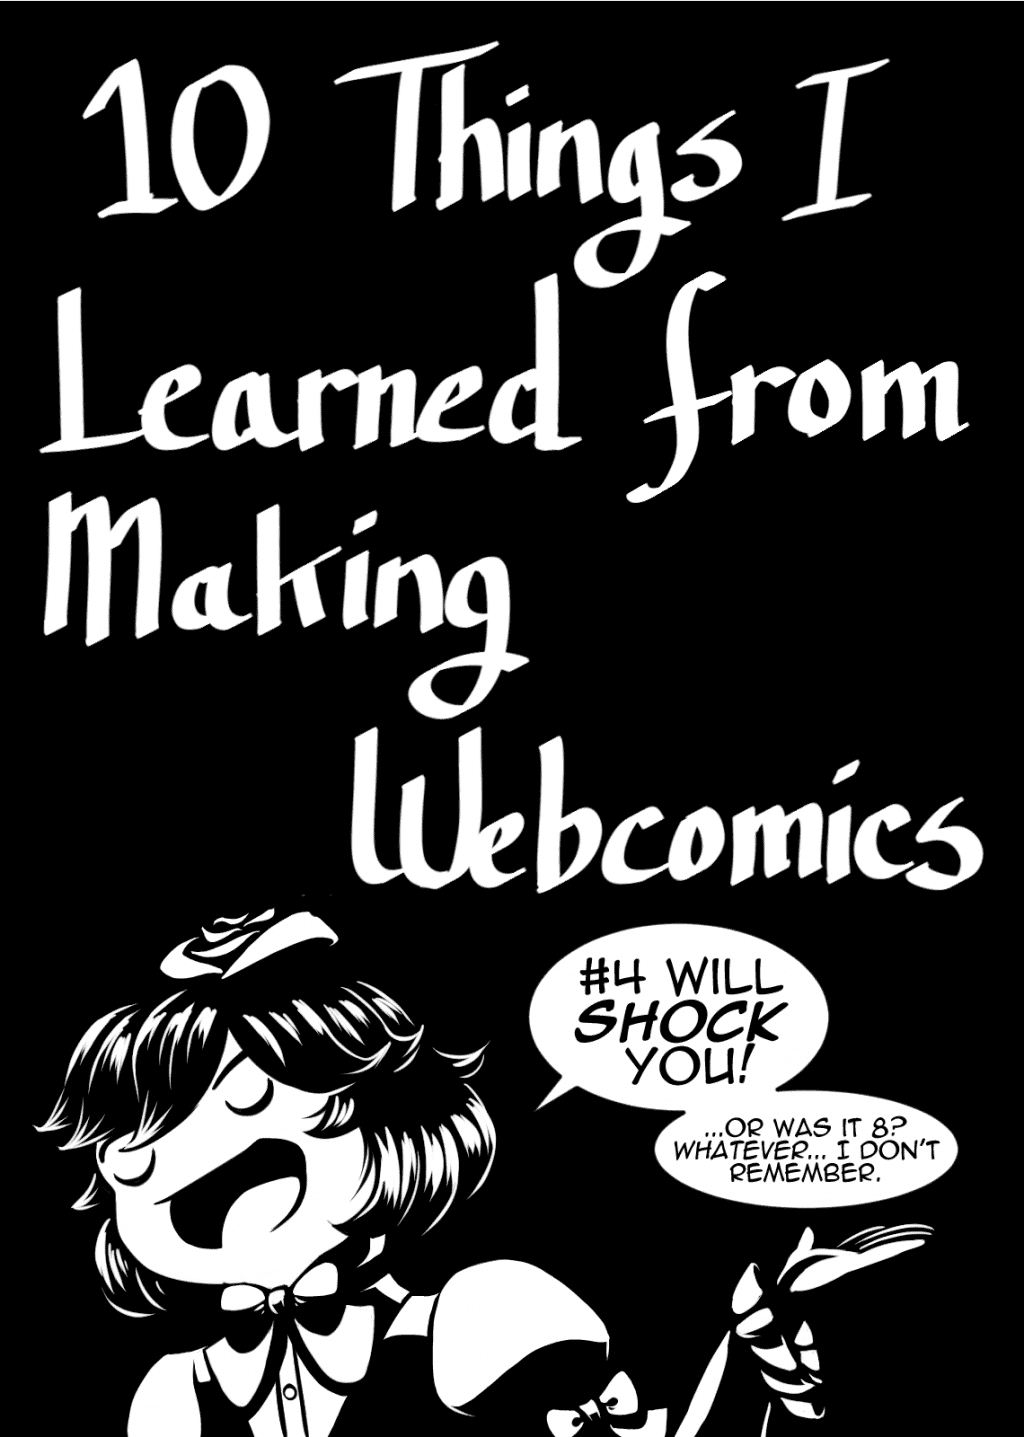 10 Things I Learned from Making Webcomics Featured Image | 10 Lessons Blog Post